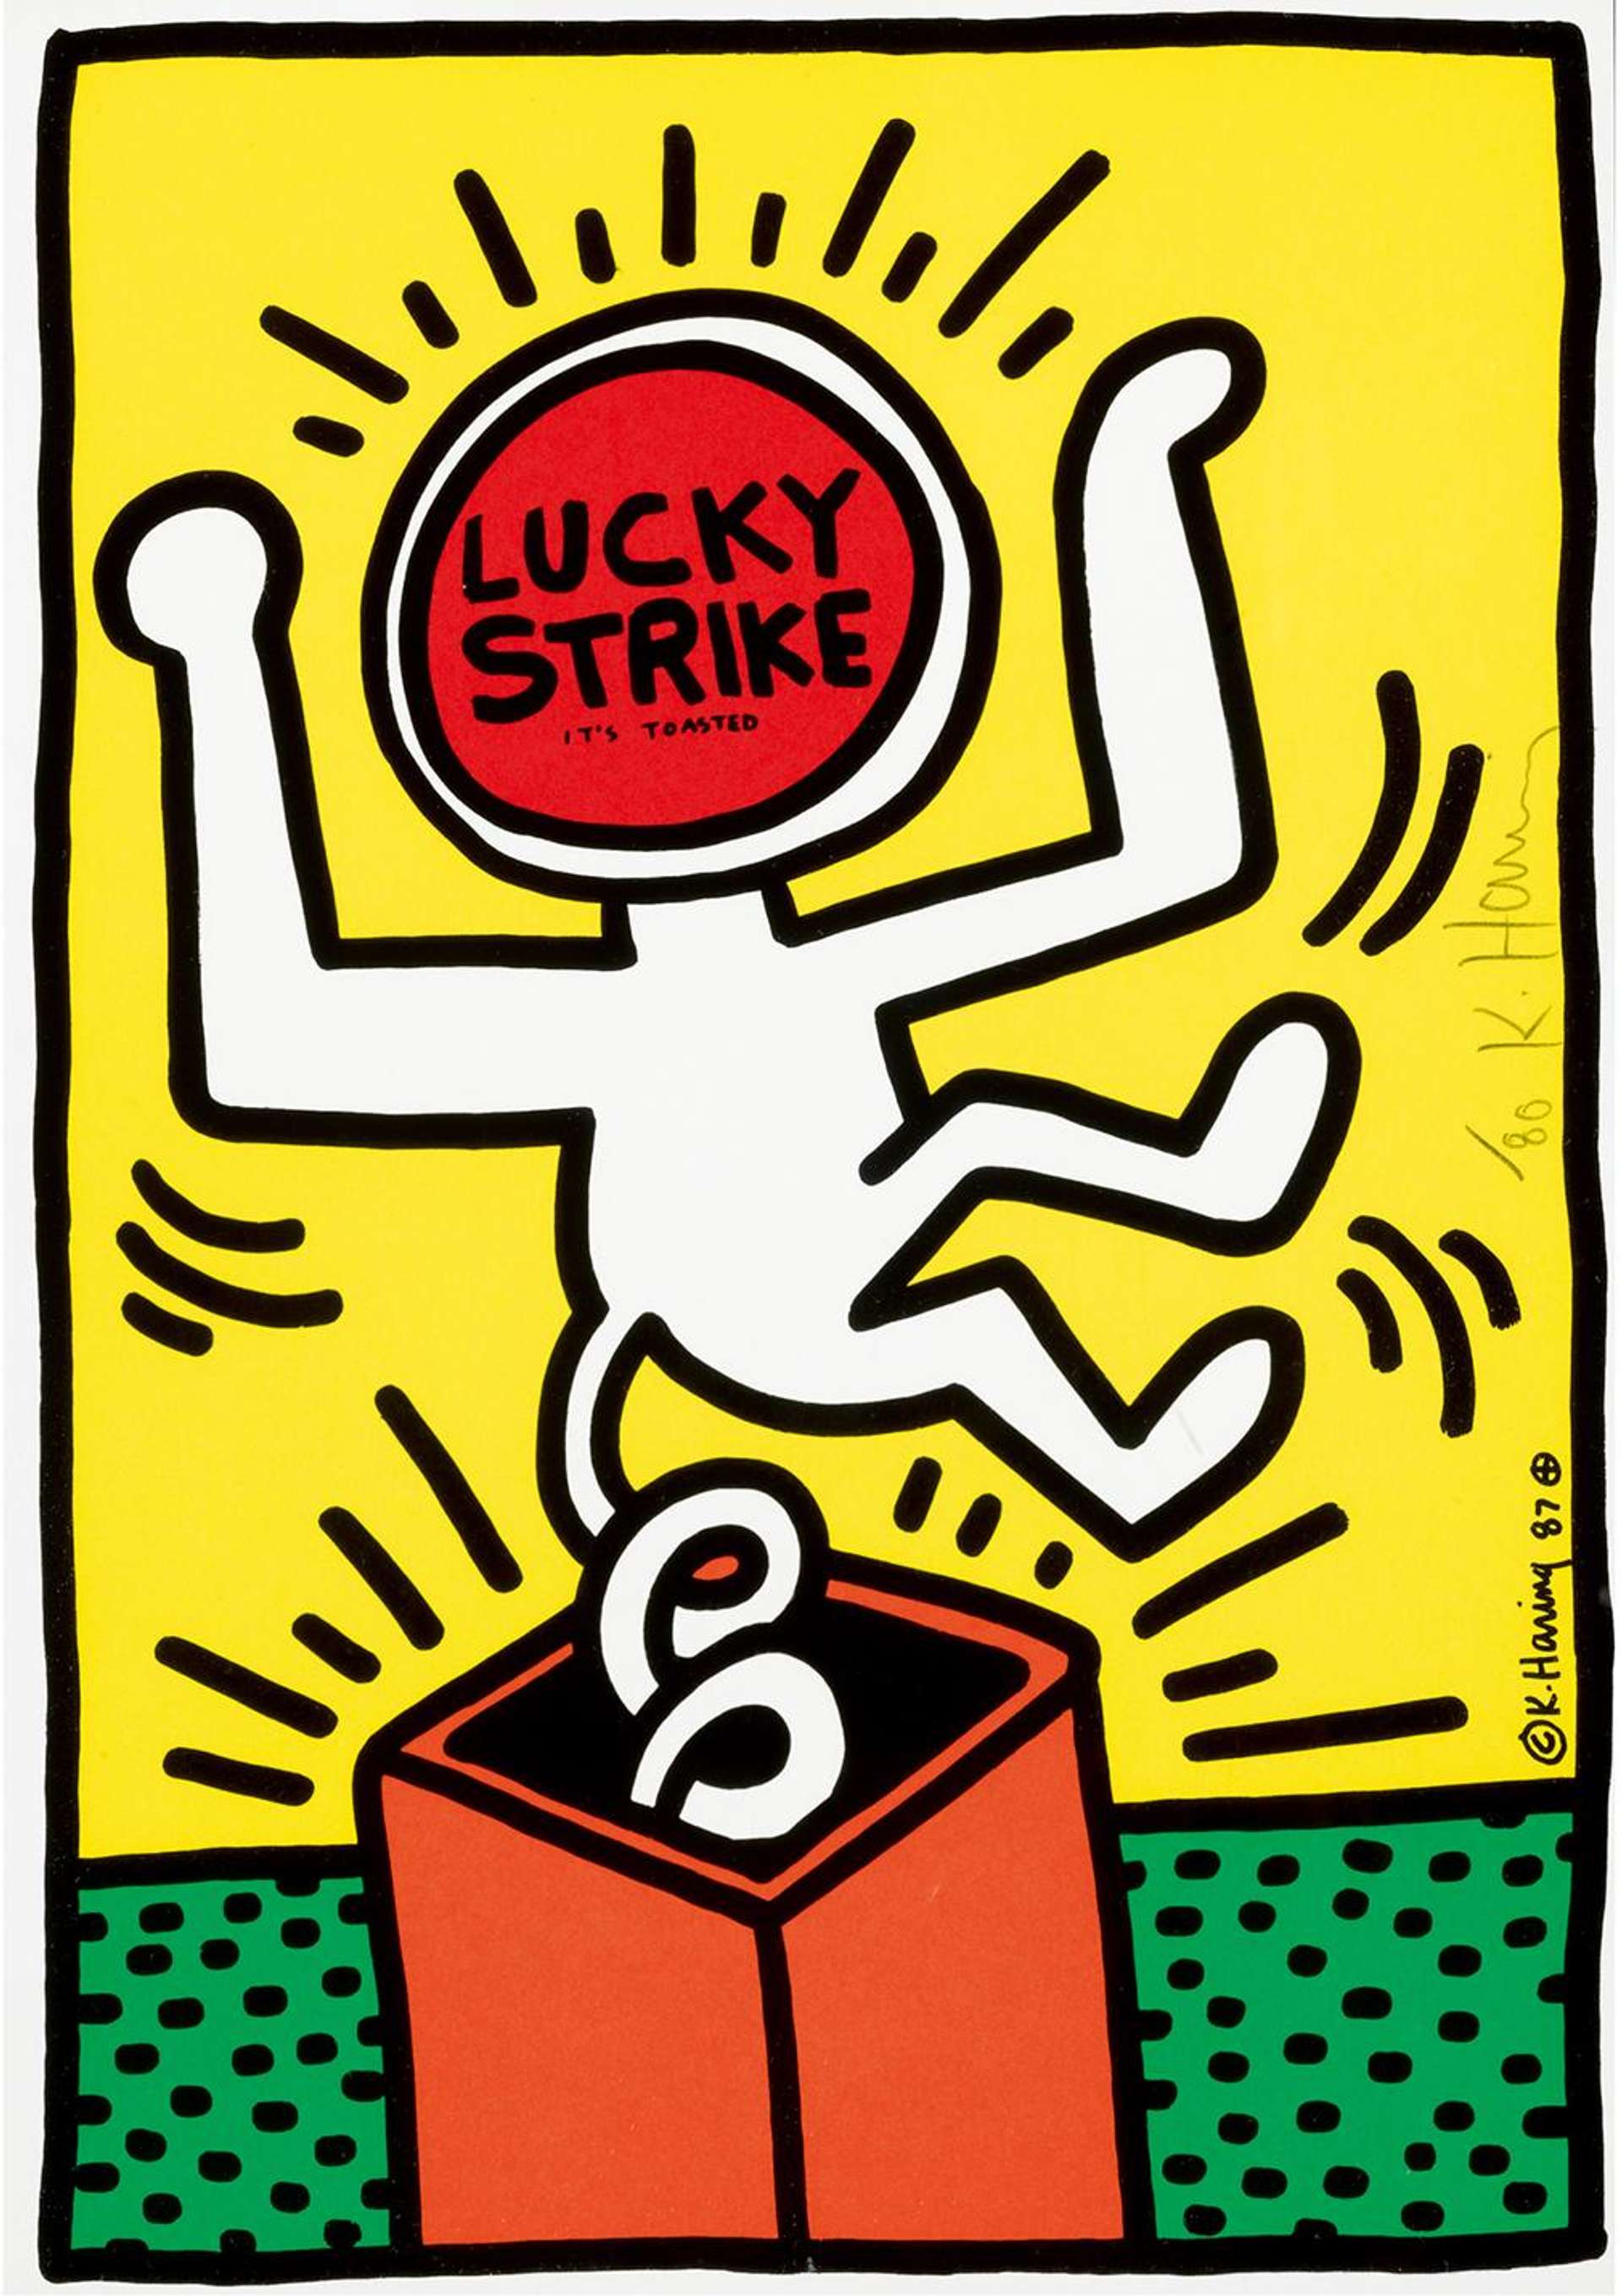 10 Facts About Keith Haring's Lucky Strike